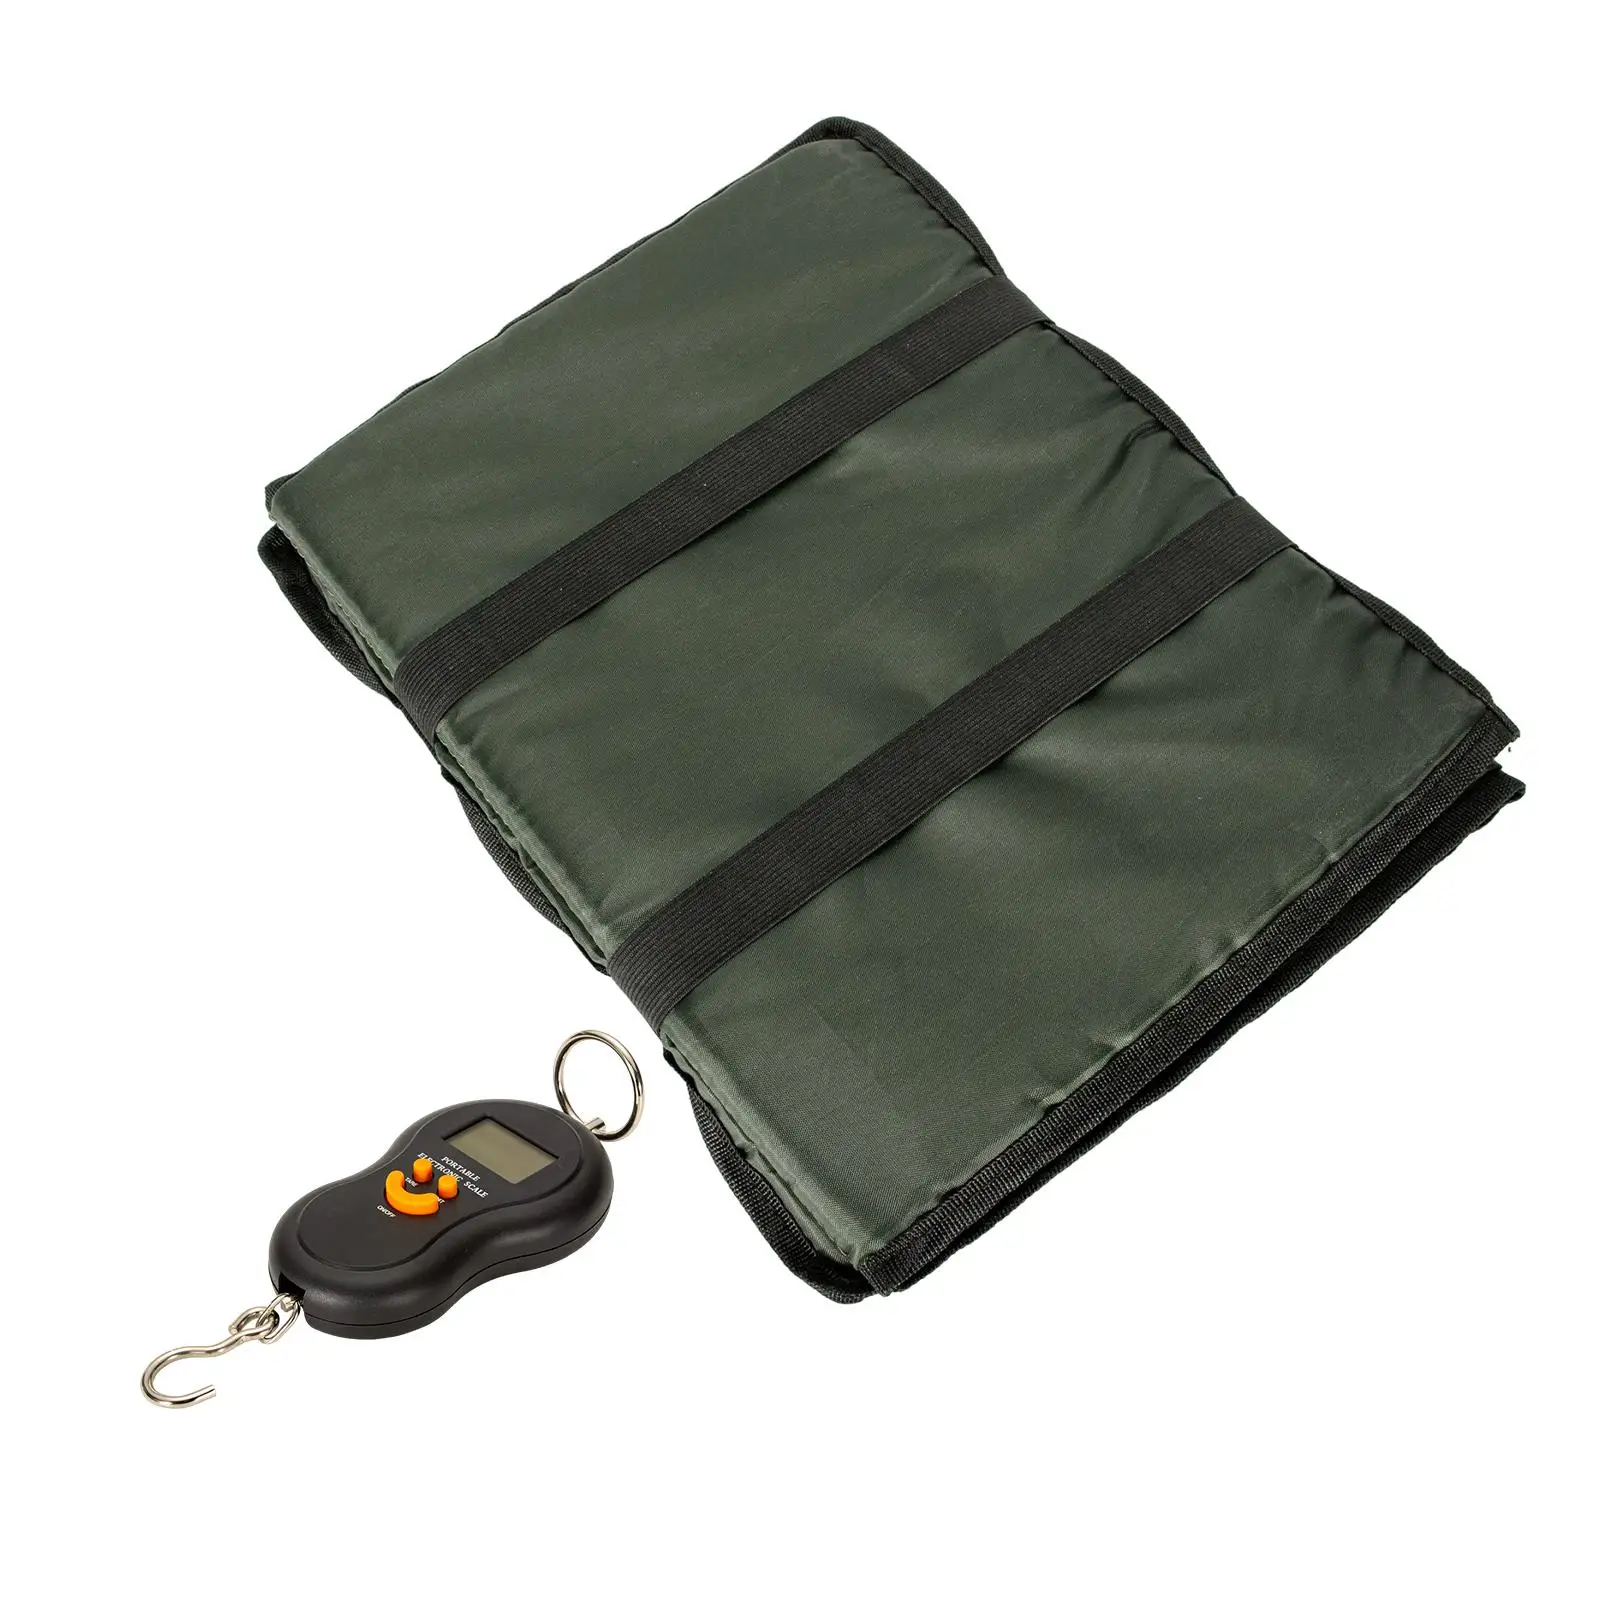 Waterproof Foldable Fishing Landing Mat Protection Tackle Tools with Digital Scale Fishing Tool Fishes Pad